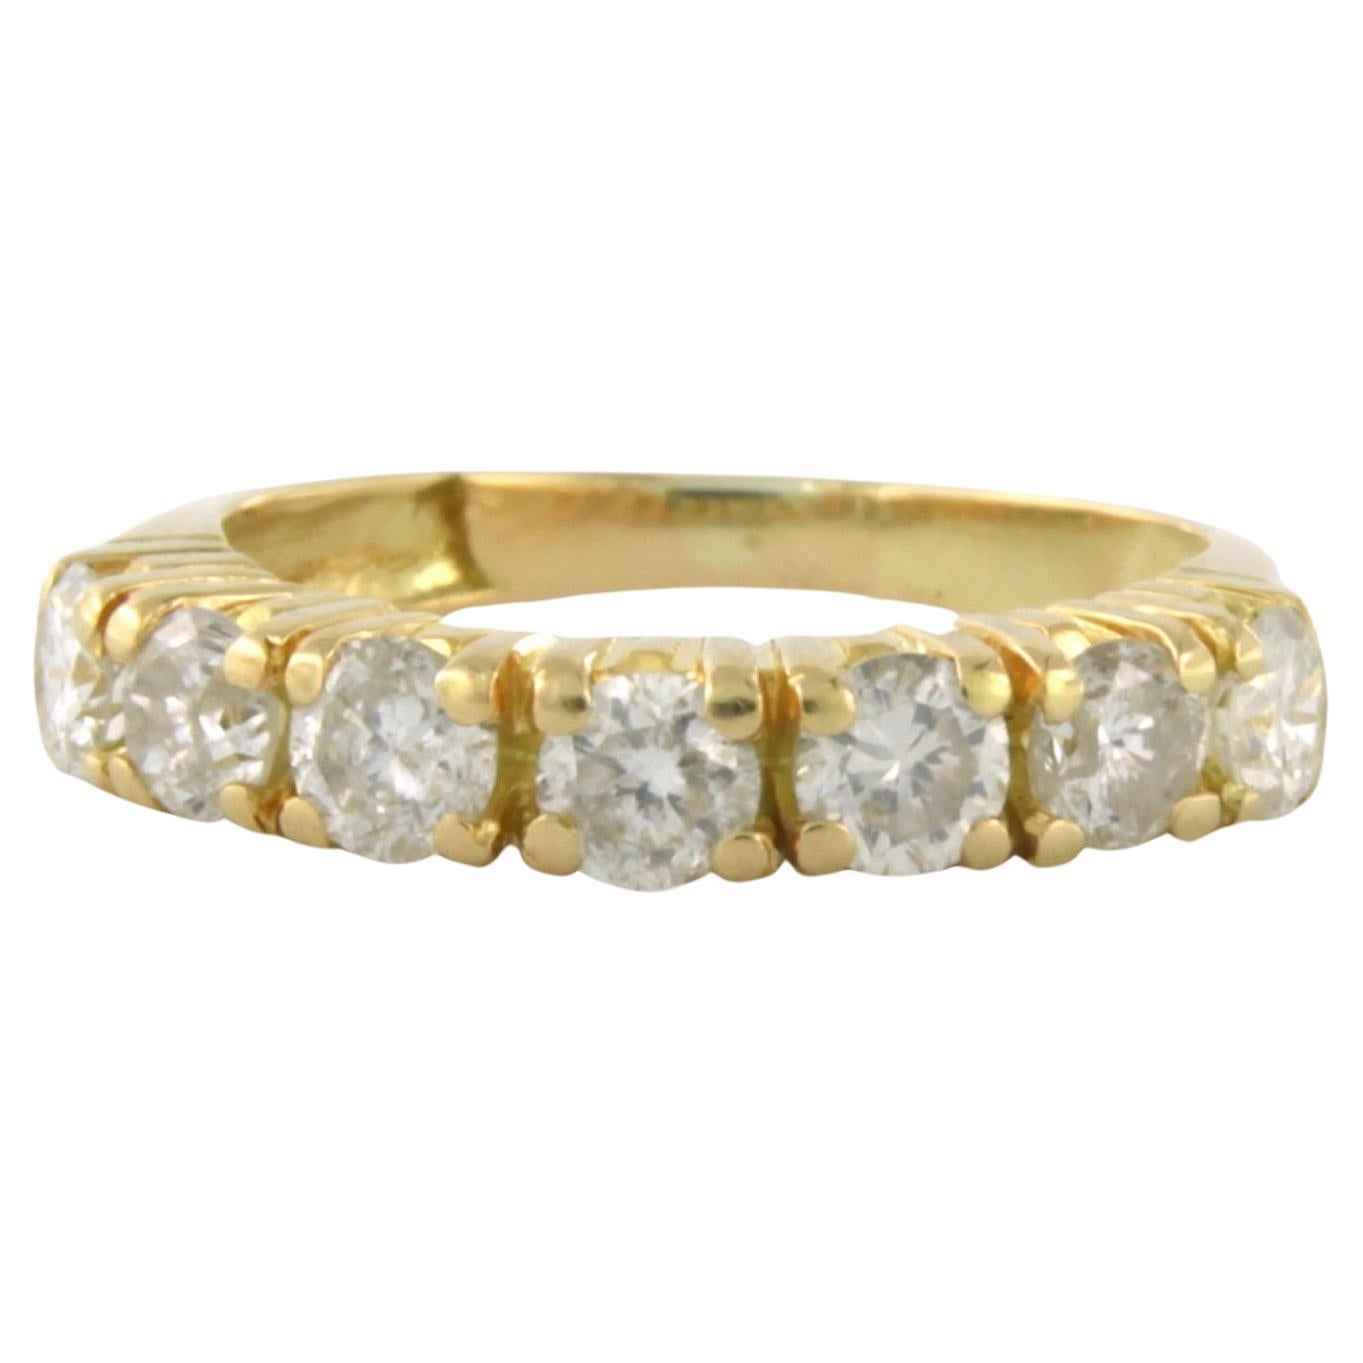 Ring with diamonds up to 0.97ct 18k yellow gold